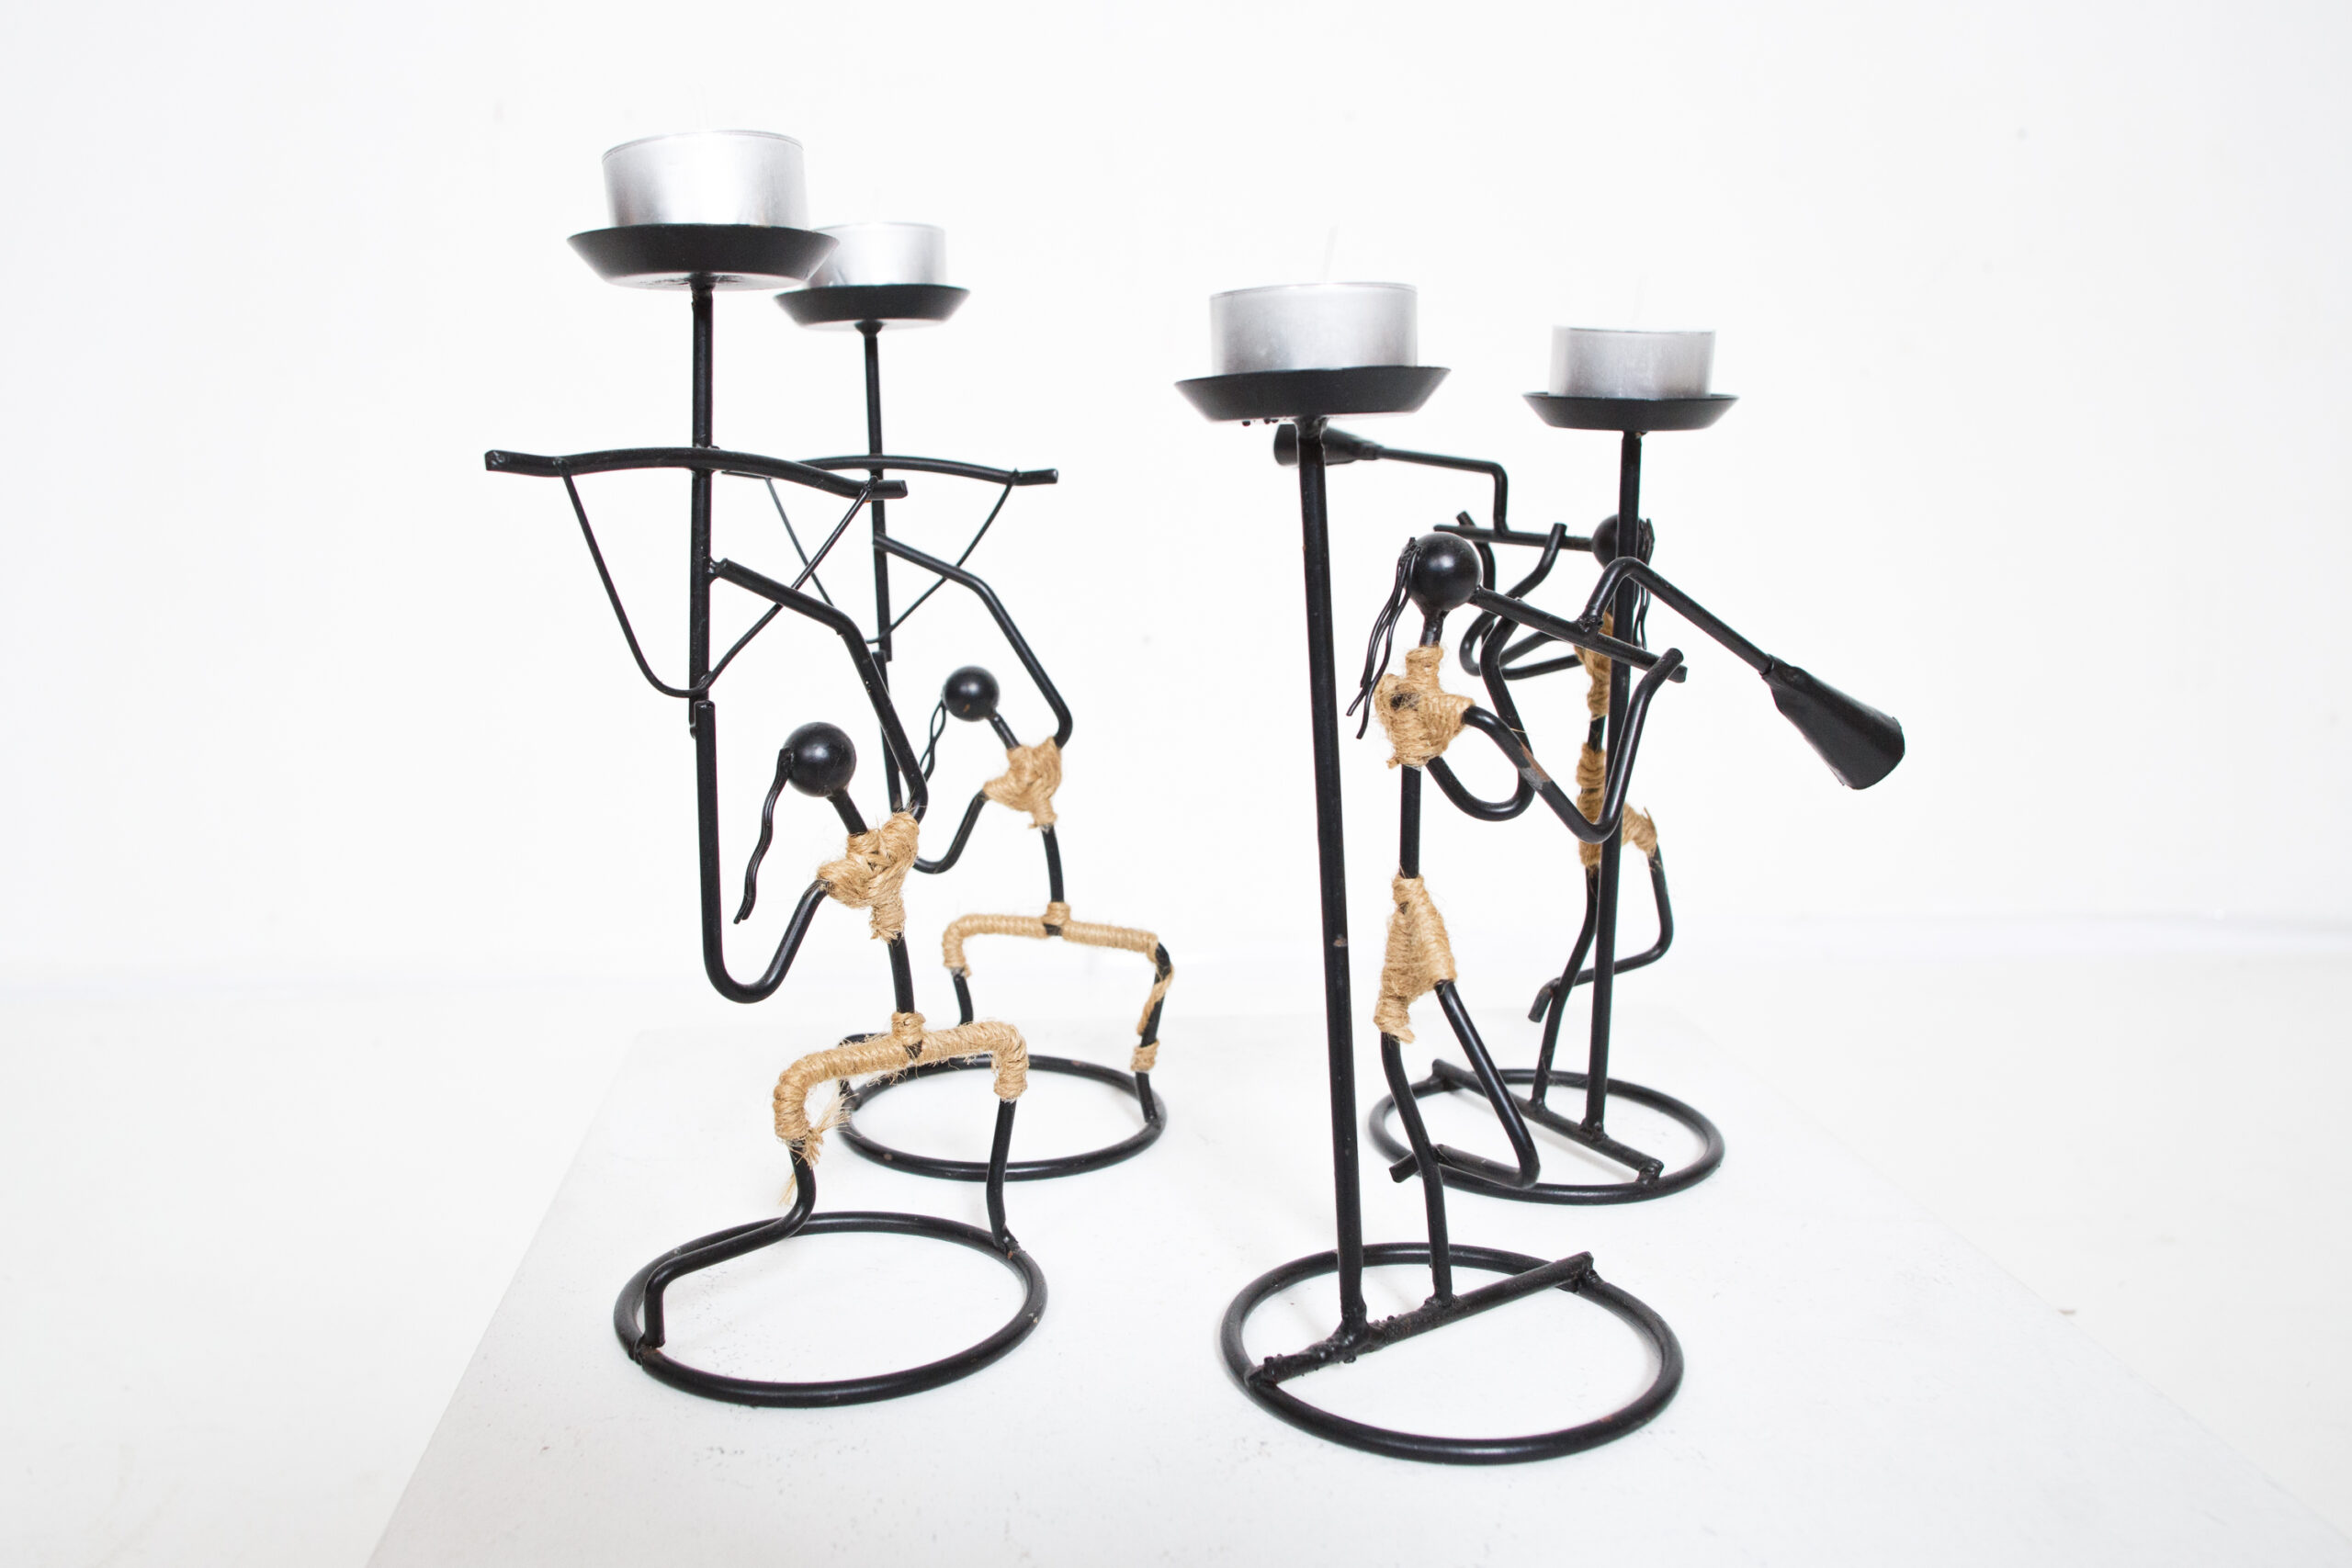 4 Dancing musician  Candleholders by Laurids Lonborg